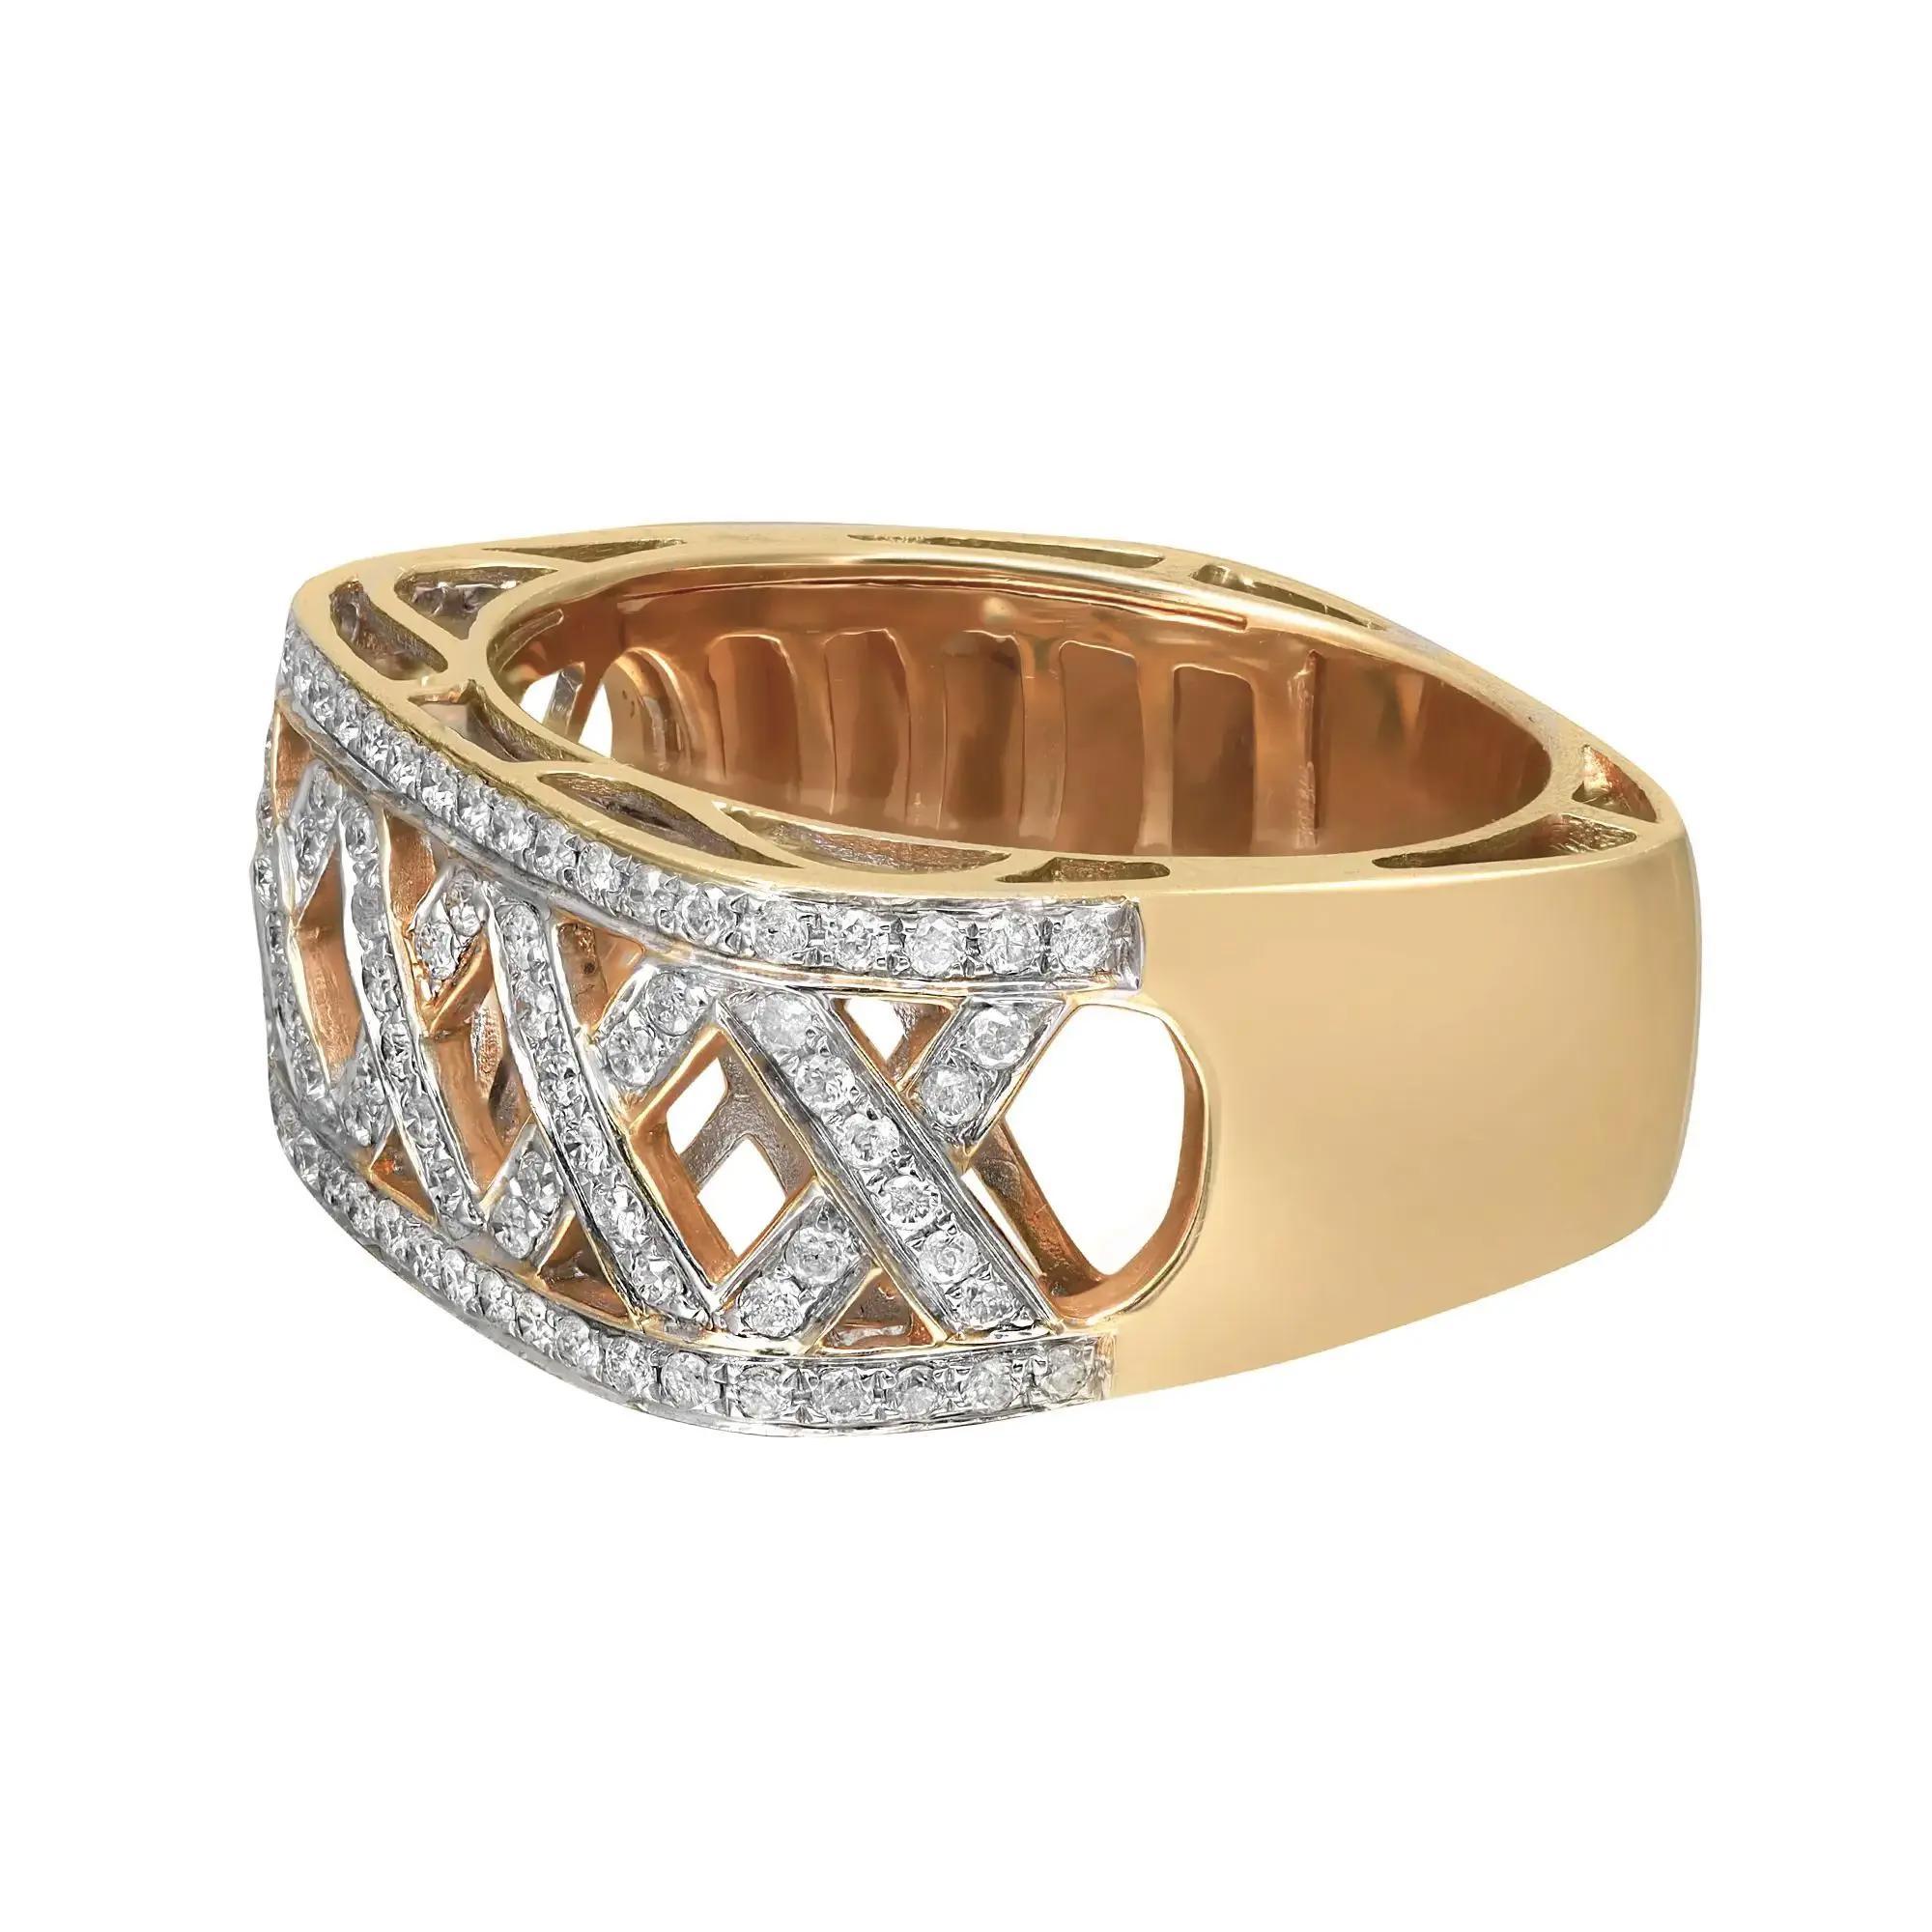 This wide band openwork crisscross square ring is crafted in high polished 14K yellow gold. Set with round cut diamonds, totaling 0.55 carat. The diamond color is H-I with SI1 clarity. Ring size 7.5. Width of the ring 10.11 mm. Total weight: 8.08